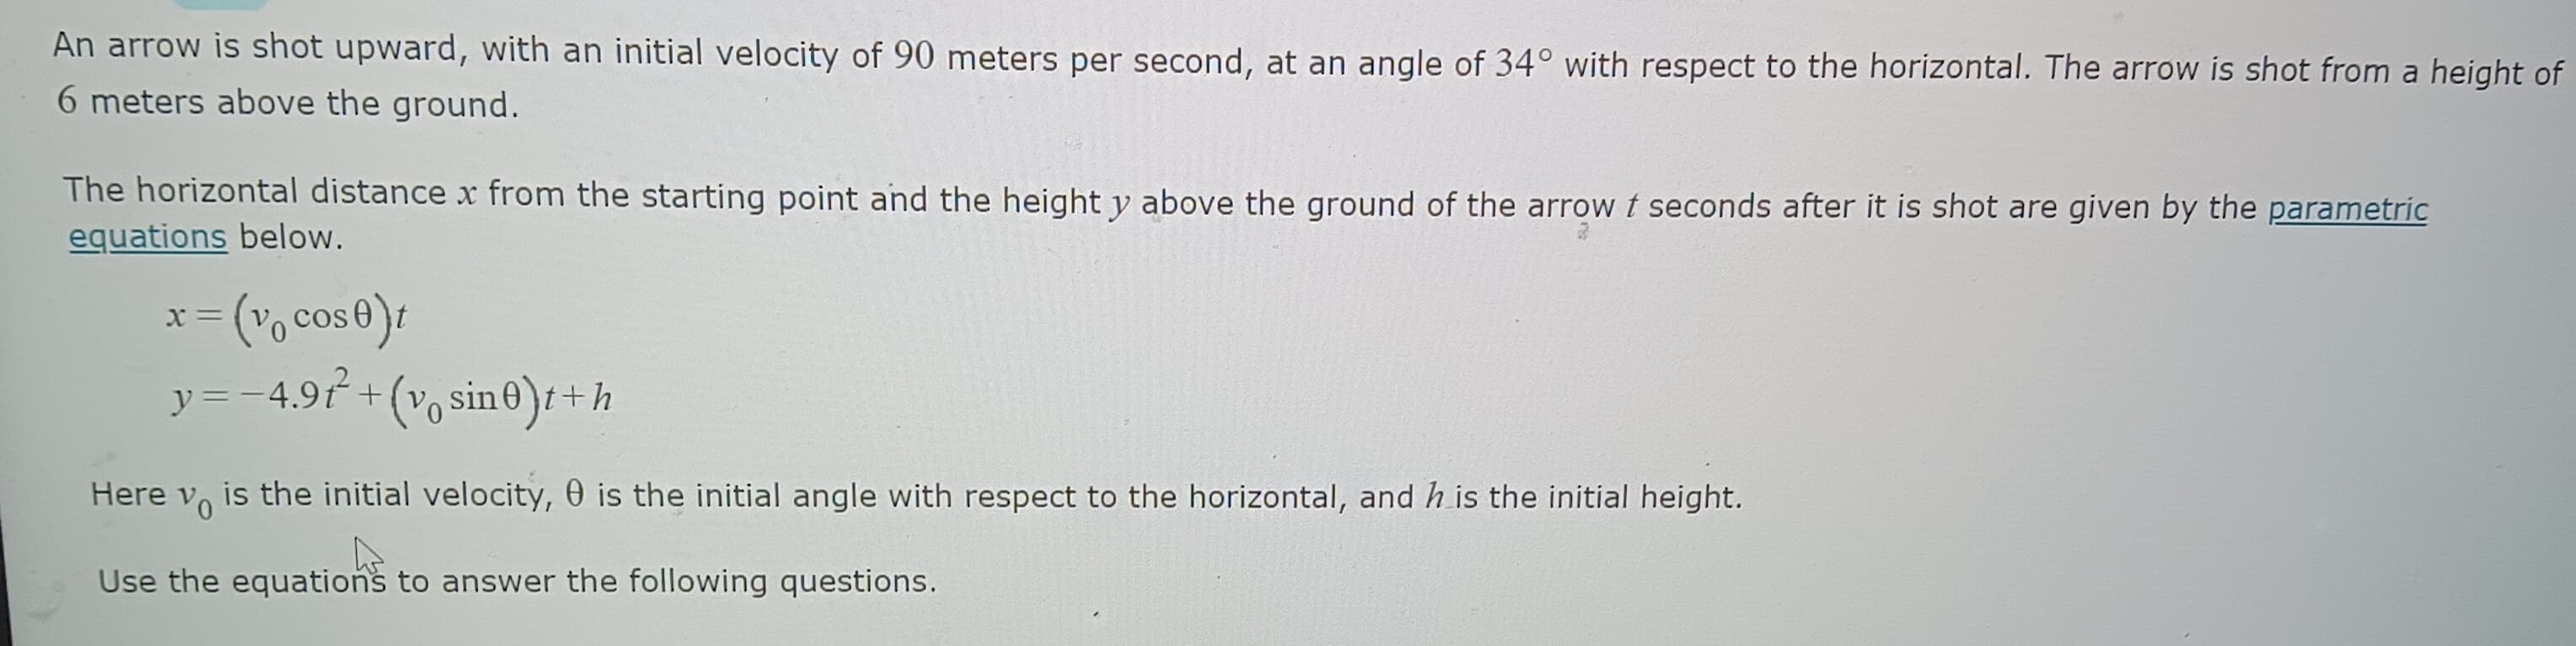 An arrow is shot upward, with an initial velocity of 90 meters per second, at an angle of 34° with respect to the horizontal. The arrow is shot from a height of
6 meters above the ground.
The horizontal distance x from the starting point and the height y above the ground of the arrow t seconds after it is shot are given by the parametric
equations below.
= (v₁ cos 0)t
y = −4.9t²+(v₁ sin0)t+h
X
Here Vo
is the initial velocity, is the initial angle with respect to the horizontal, and h is the initial height.
Use the equations to answer the following questions.